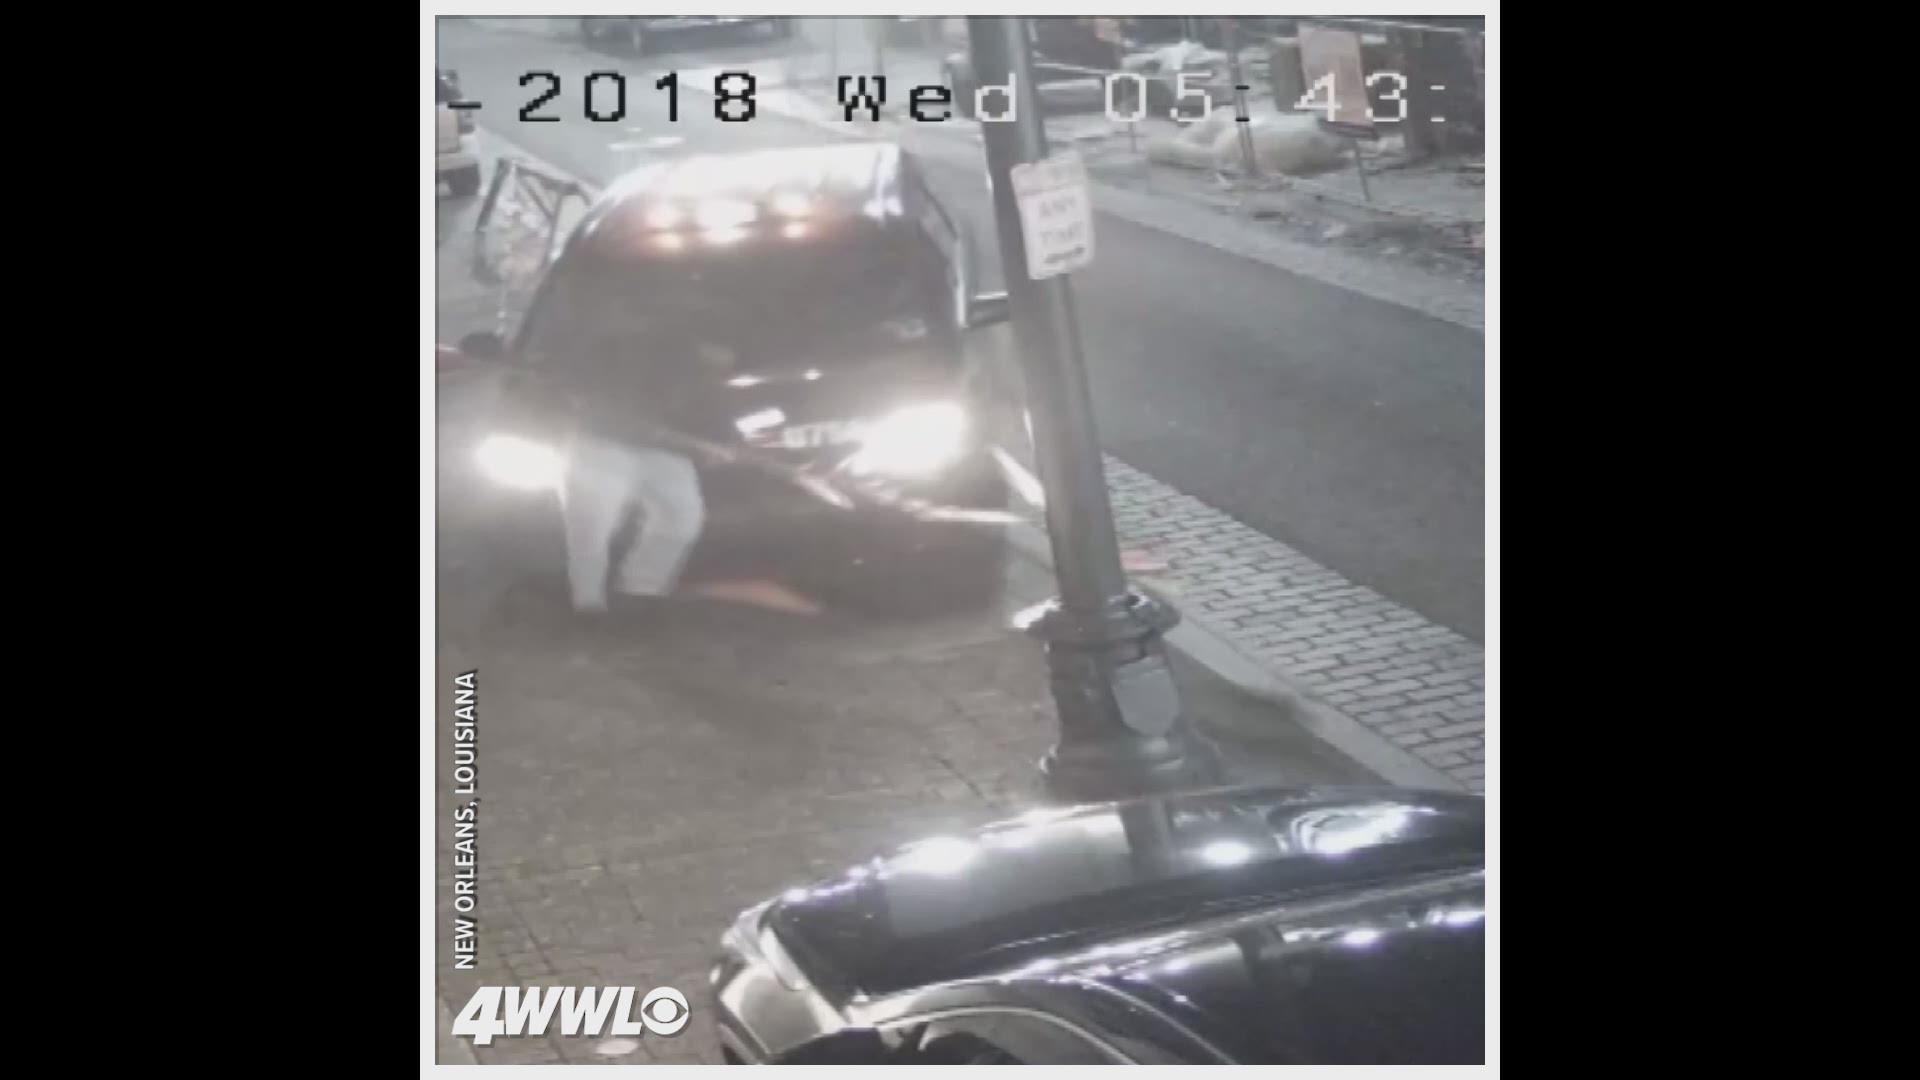 The disturbing security camera video obtained by WWL-TV shows a suspected cellphone thief running down Lafayette Street in the New Orleans CBD as he tries to avoid being struck by the cab.